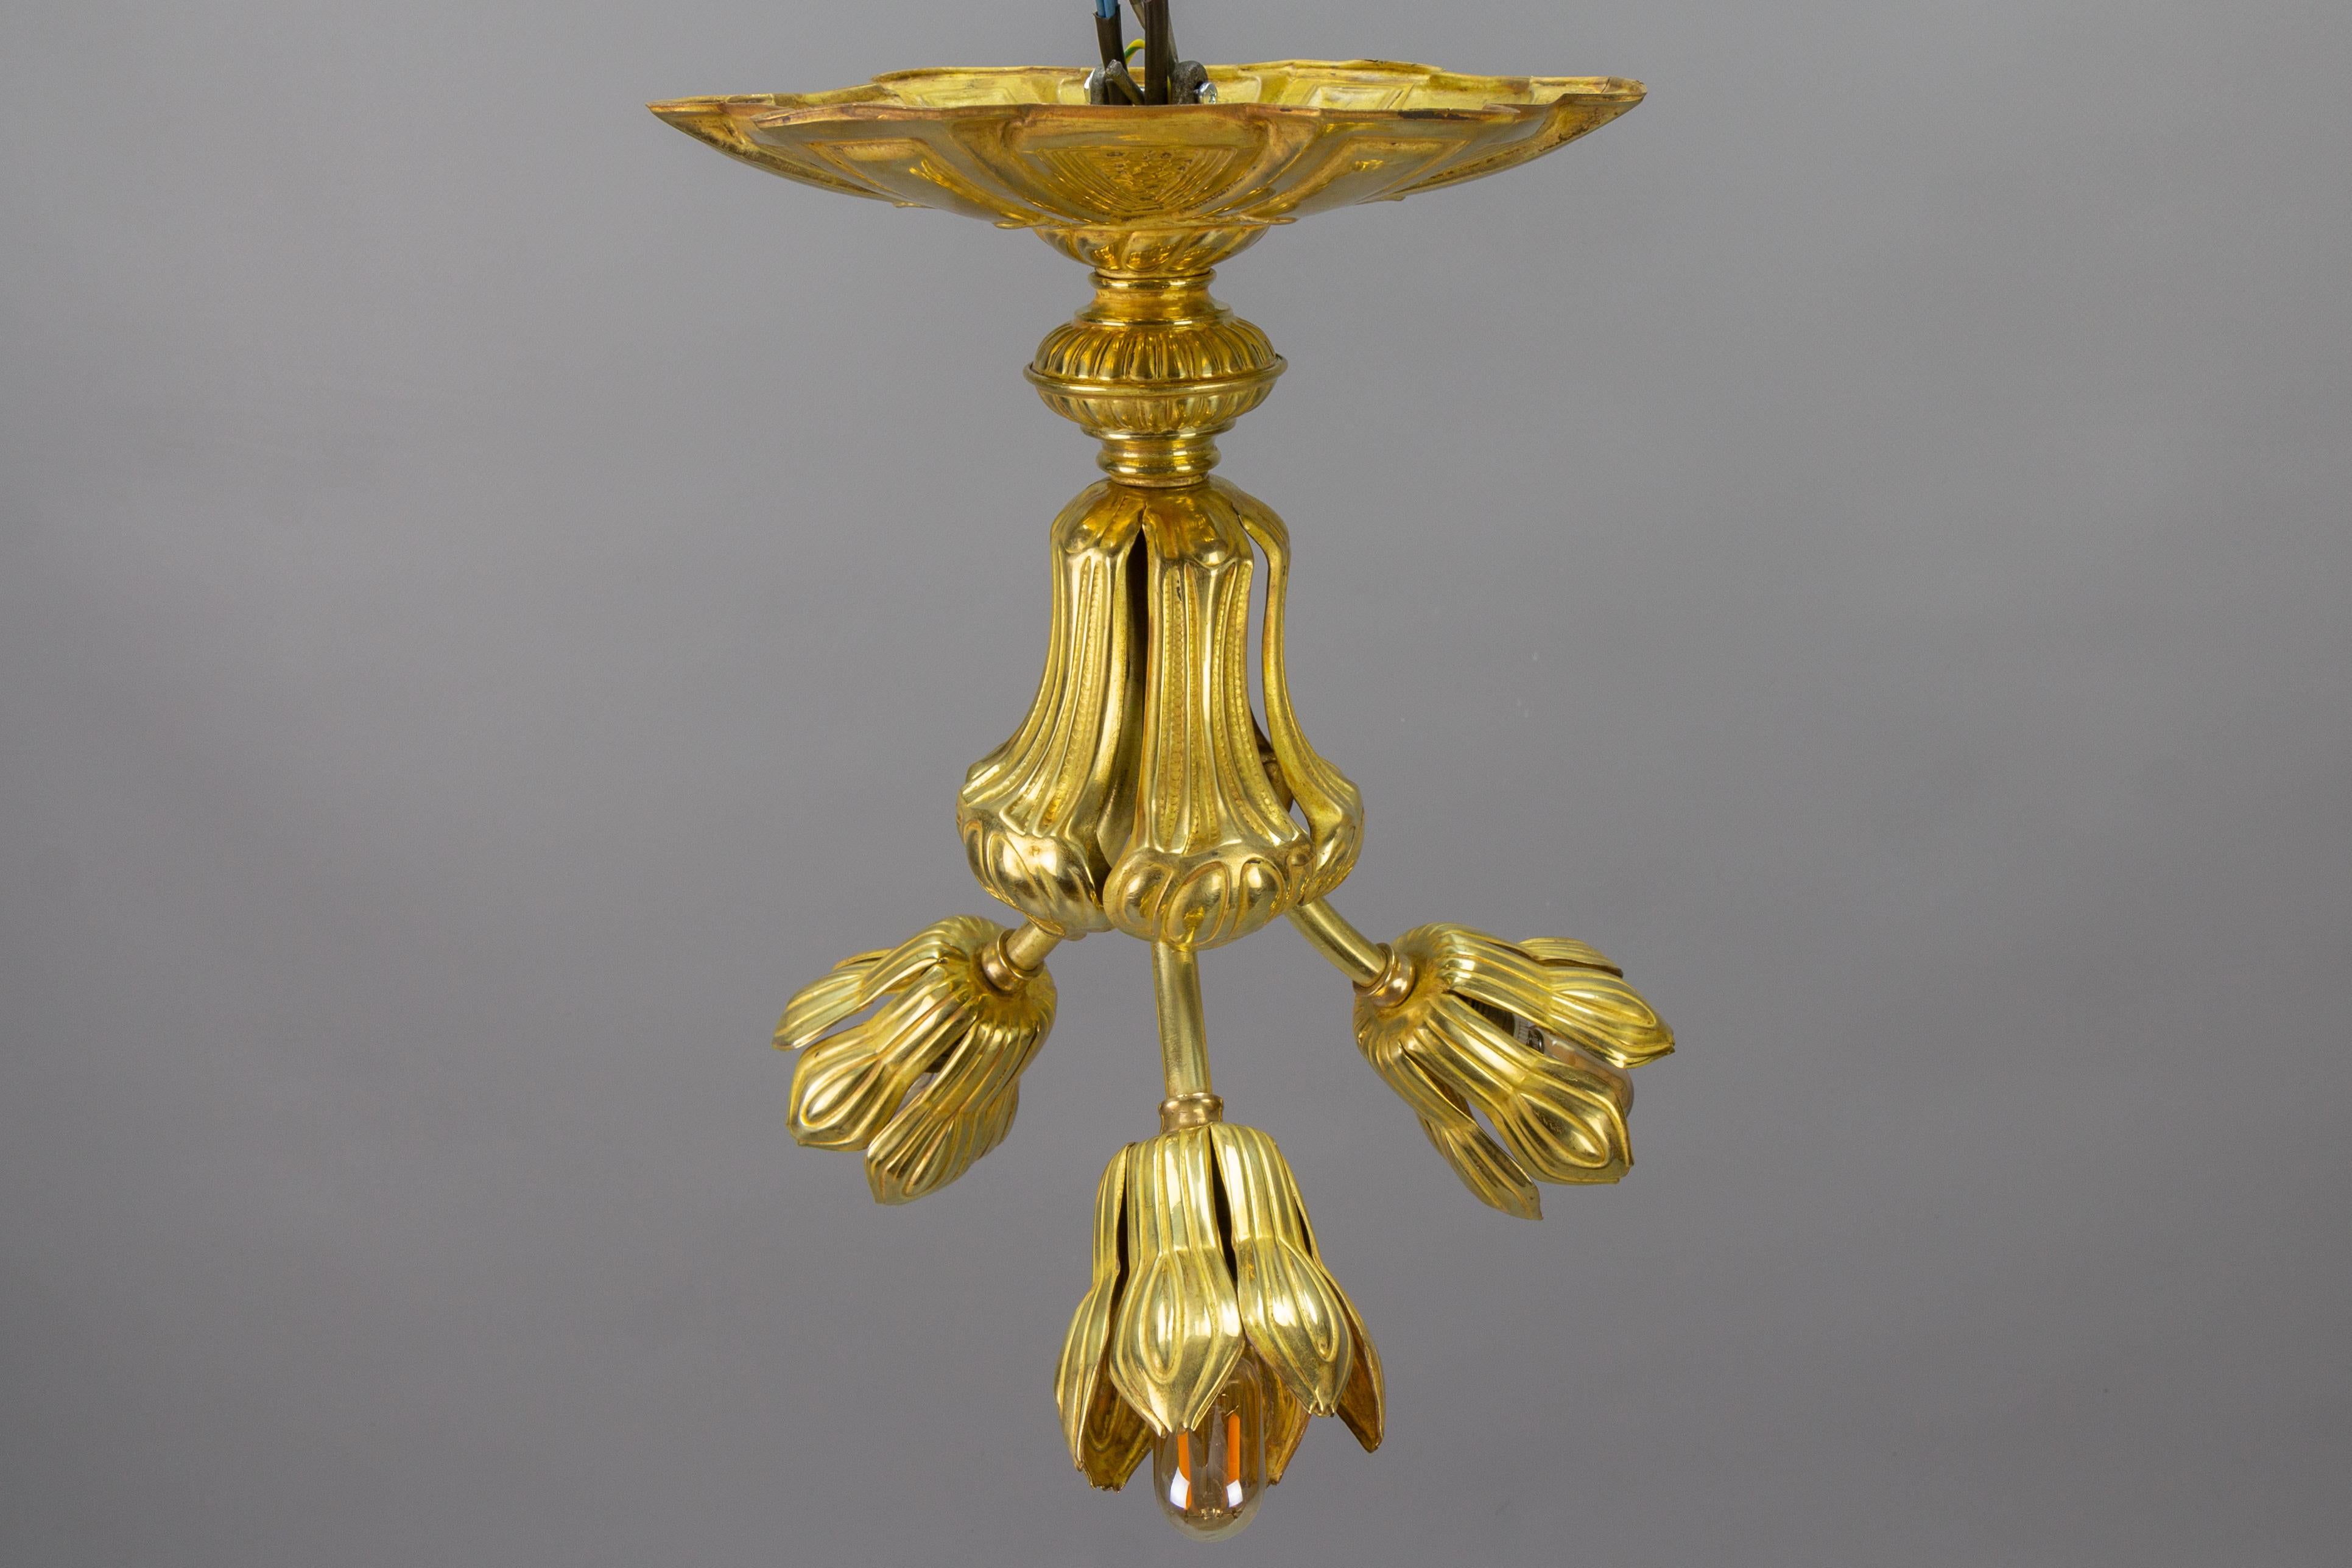  French Art Deco Three-Light Brass Ceiling Light Fixture, 1920s For Sale 1